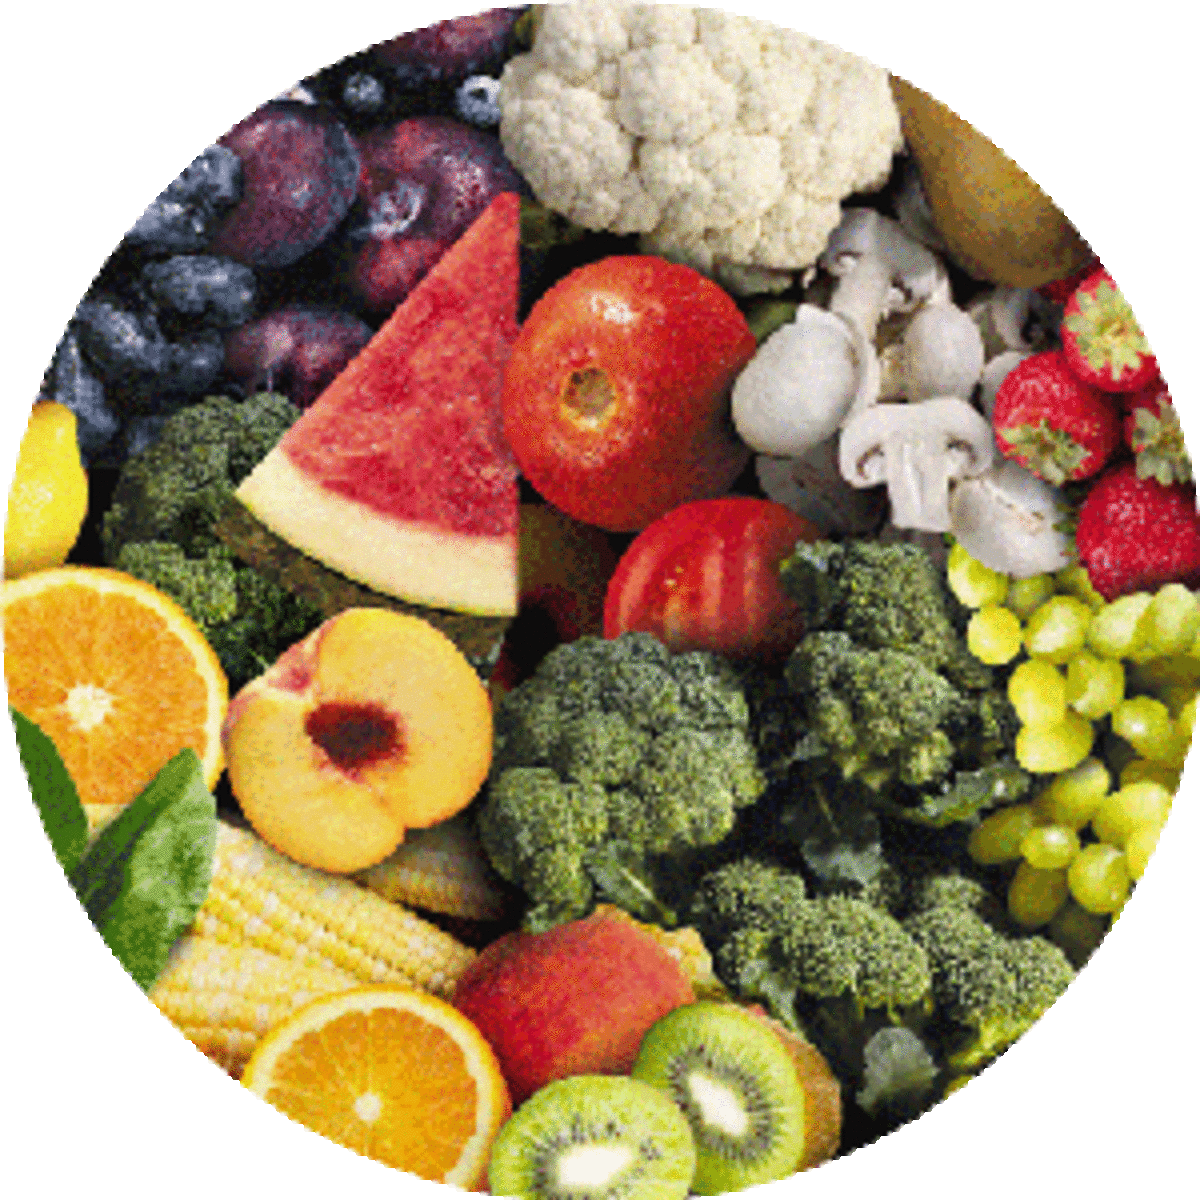 A good balance of fruits and vegetables can help with portion size control